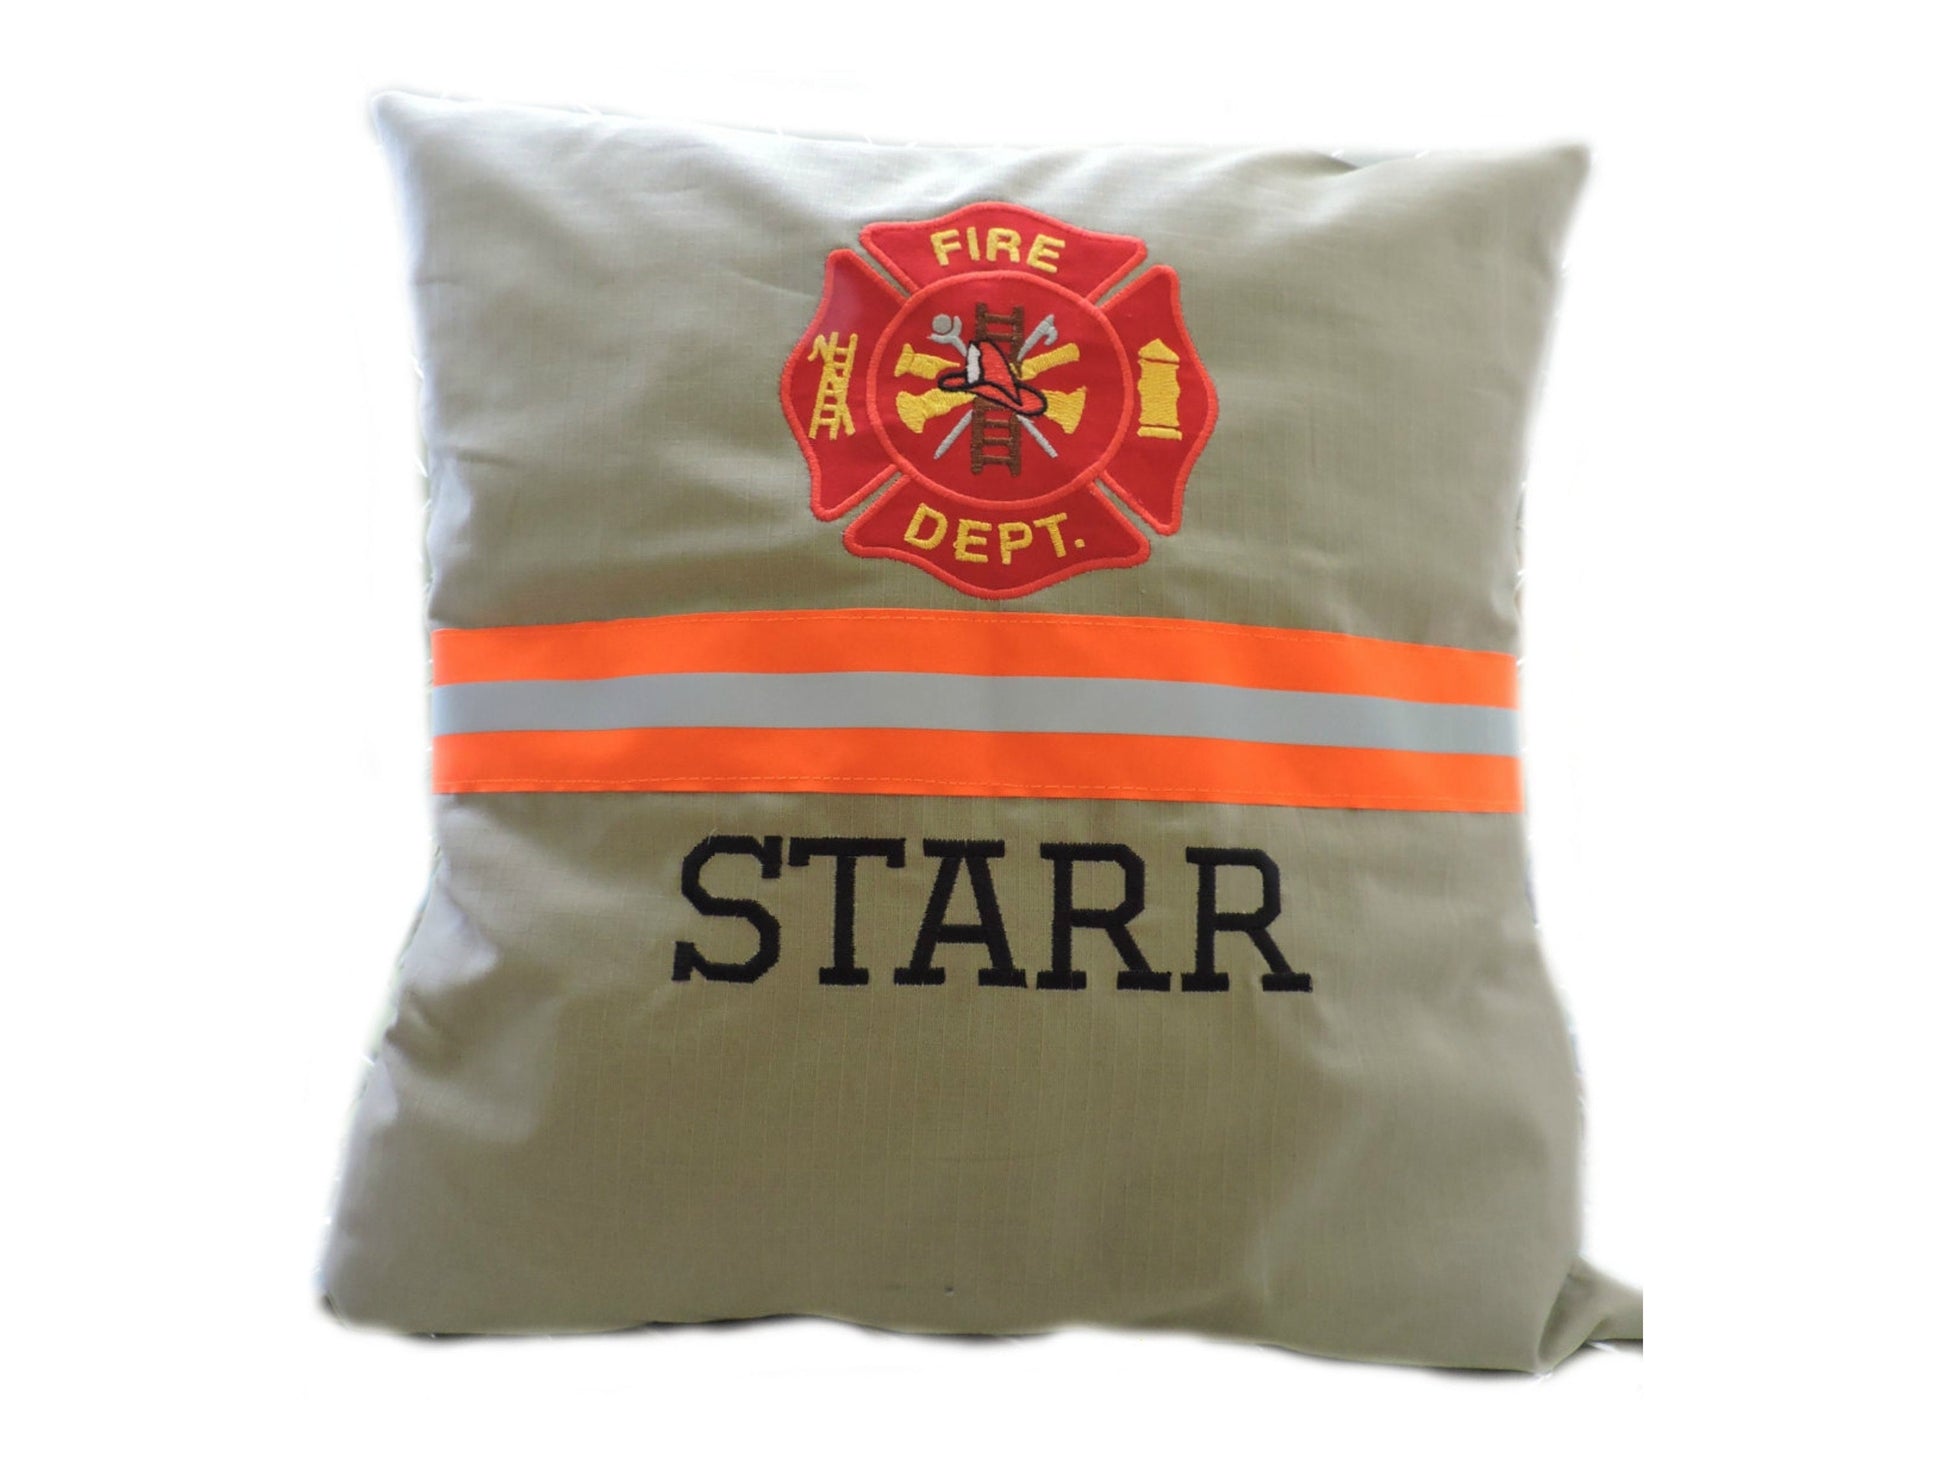 tan fabric with neon orange reflective tape Firefighter pillow cover with maltese cross